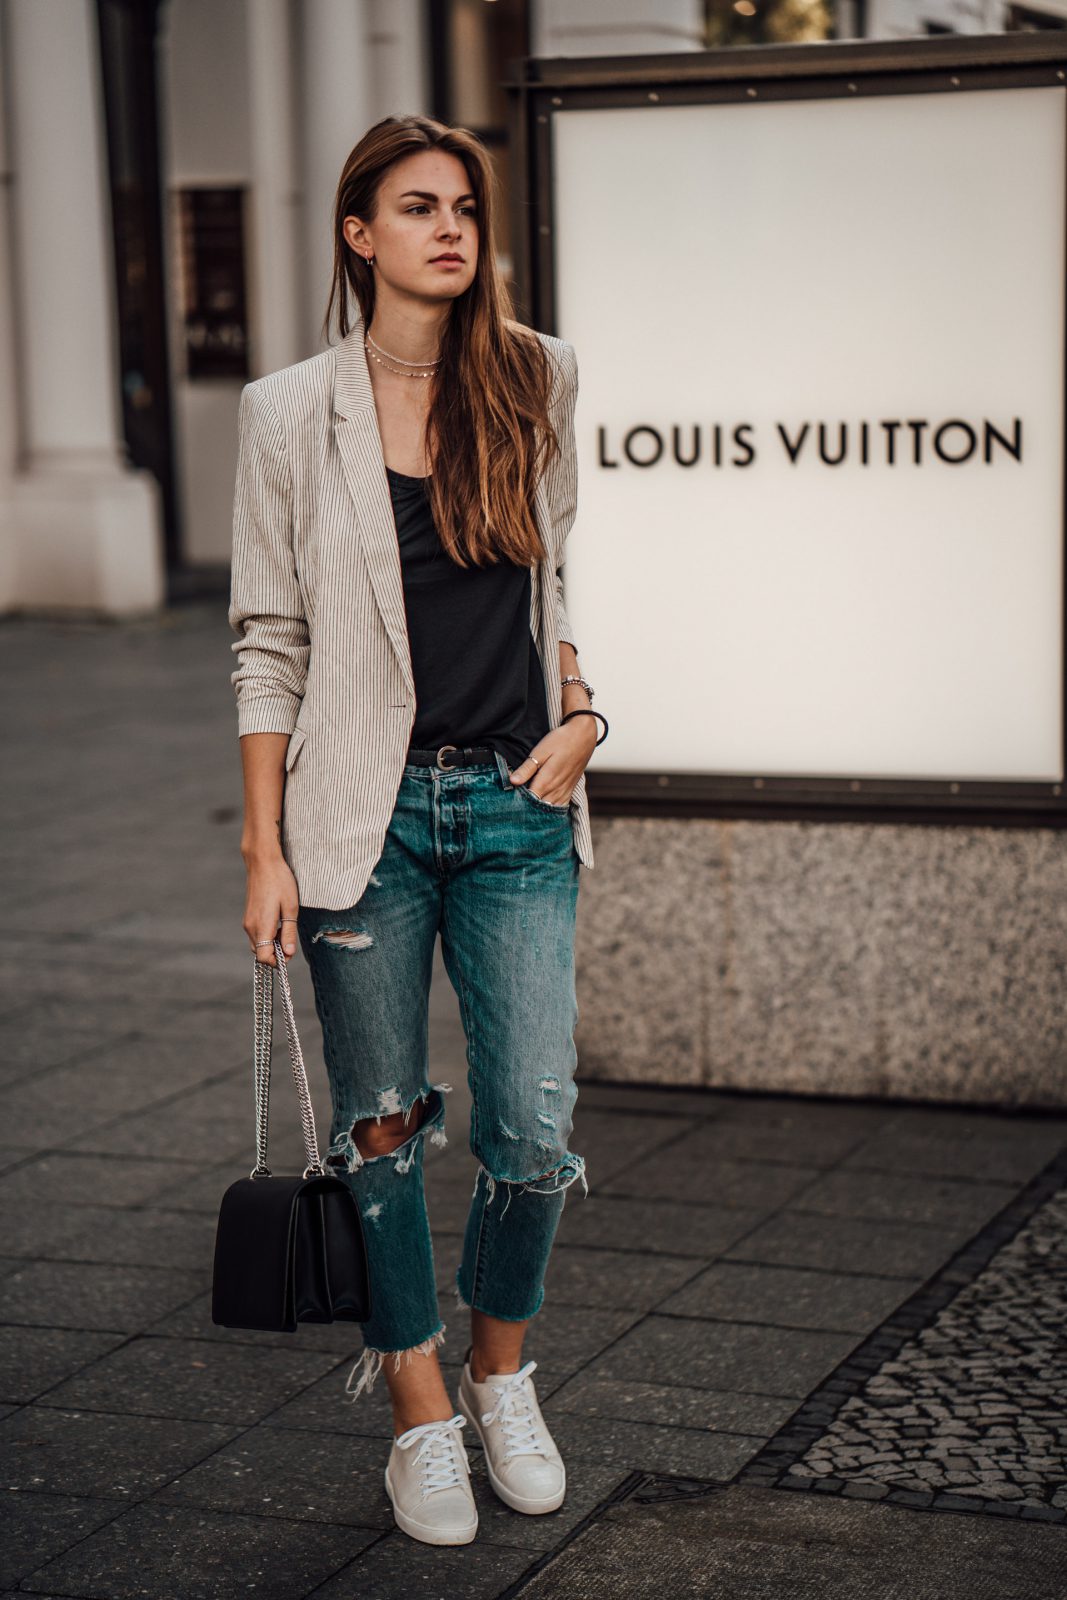 How to wear Boyfriend Jeans this fall || Casual Chic Outfit